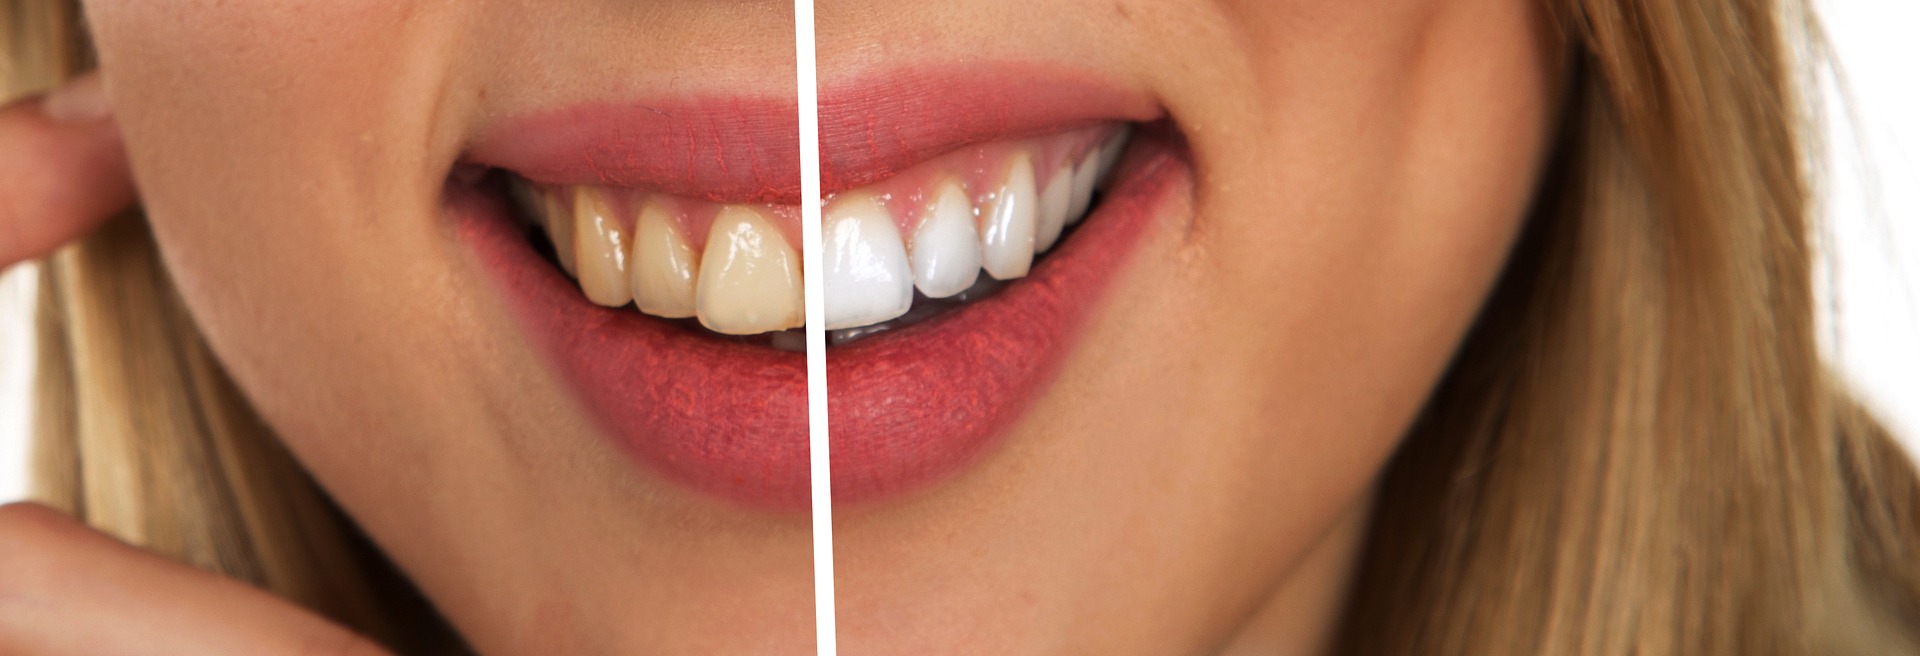 Foods and Drinks to Avoid After Getting Teeth Whitening Treatment